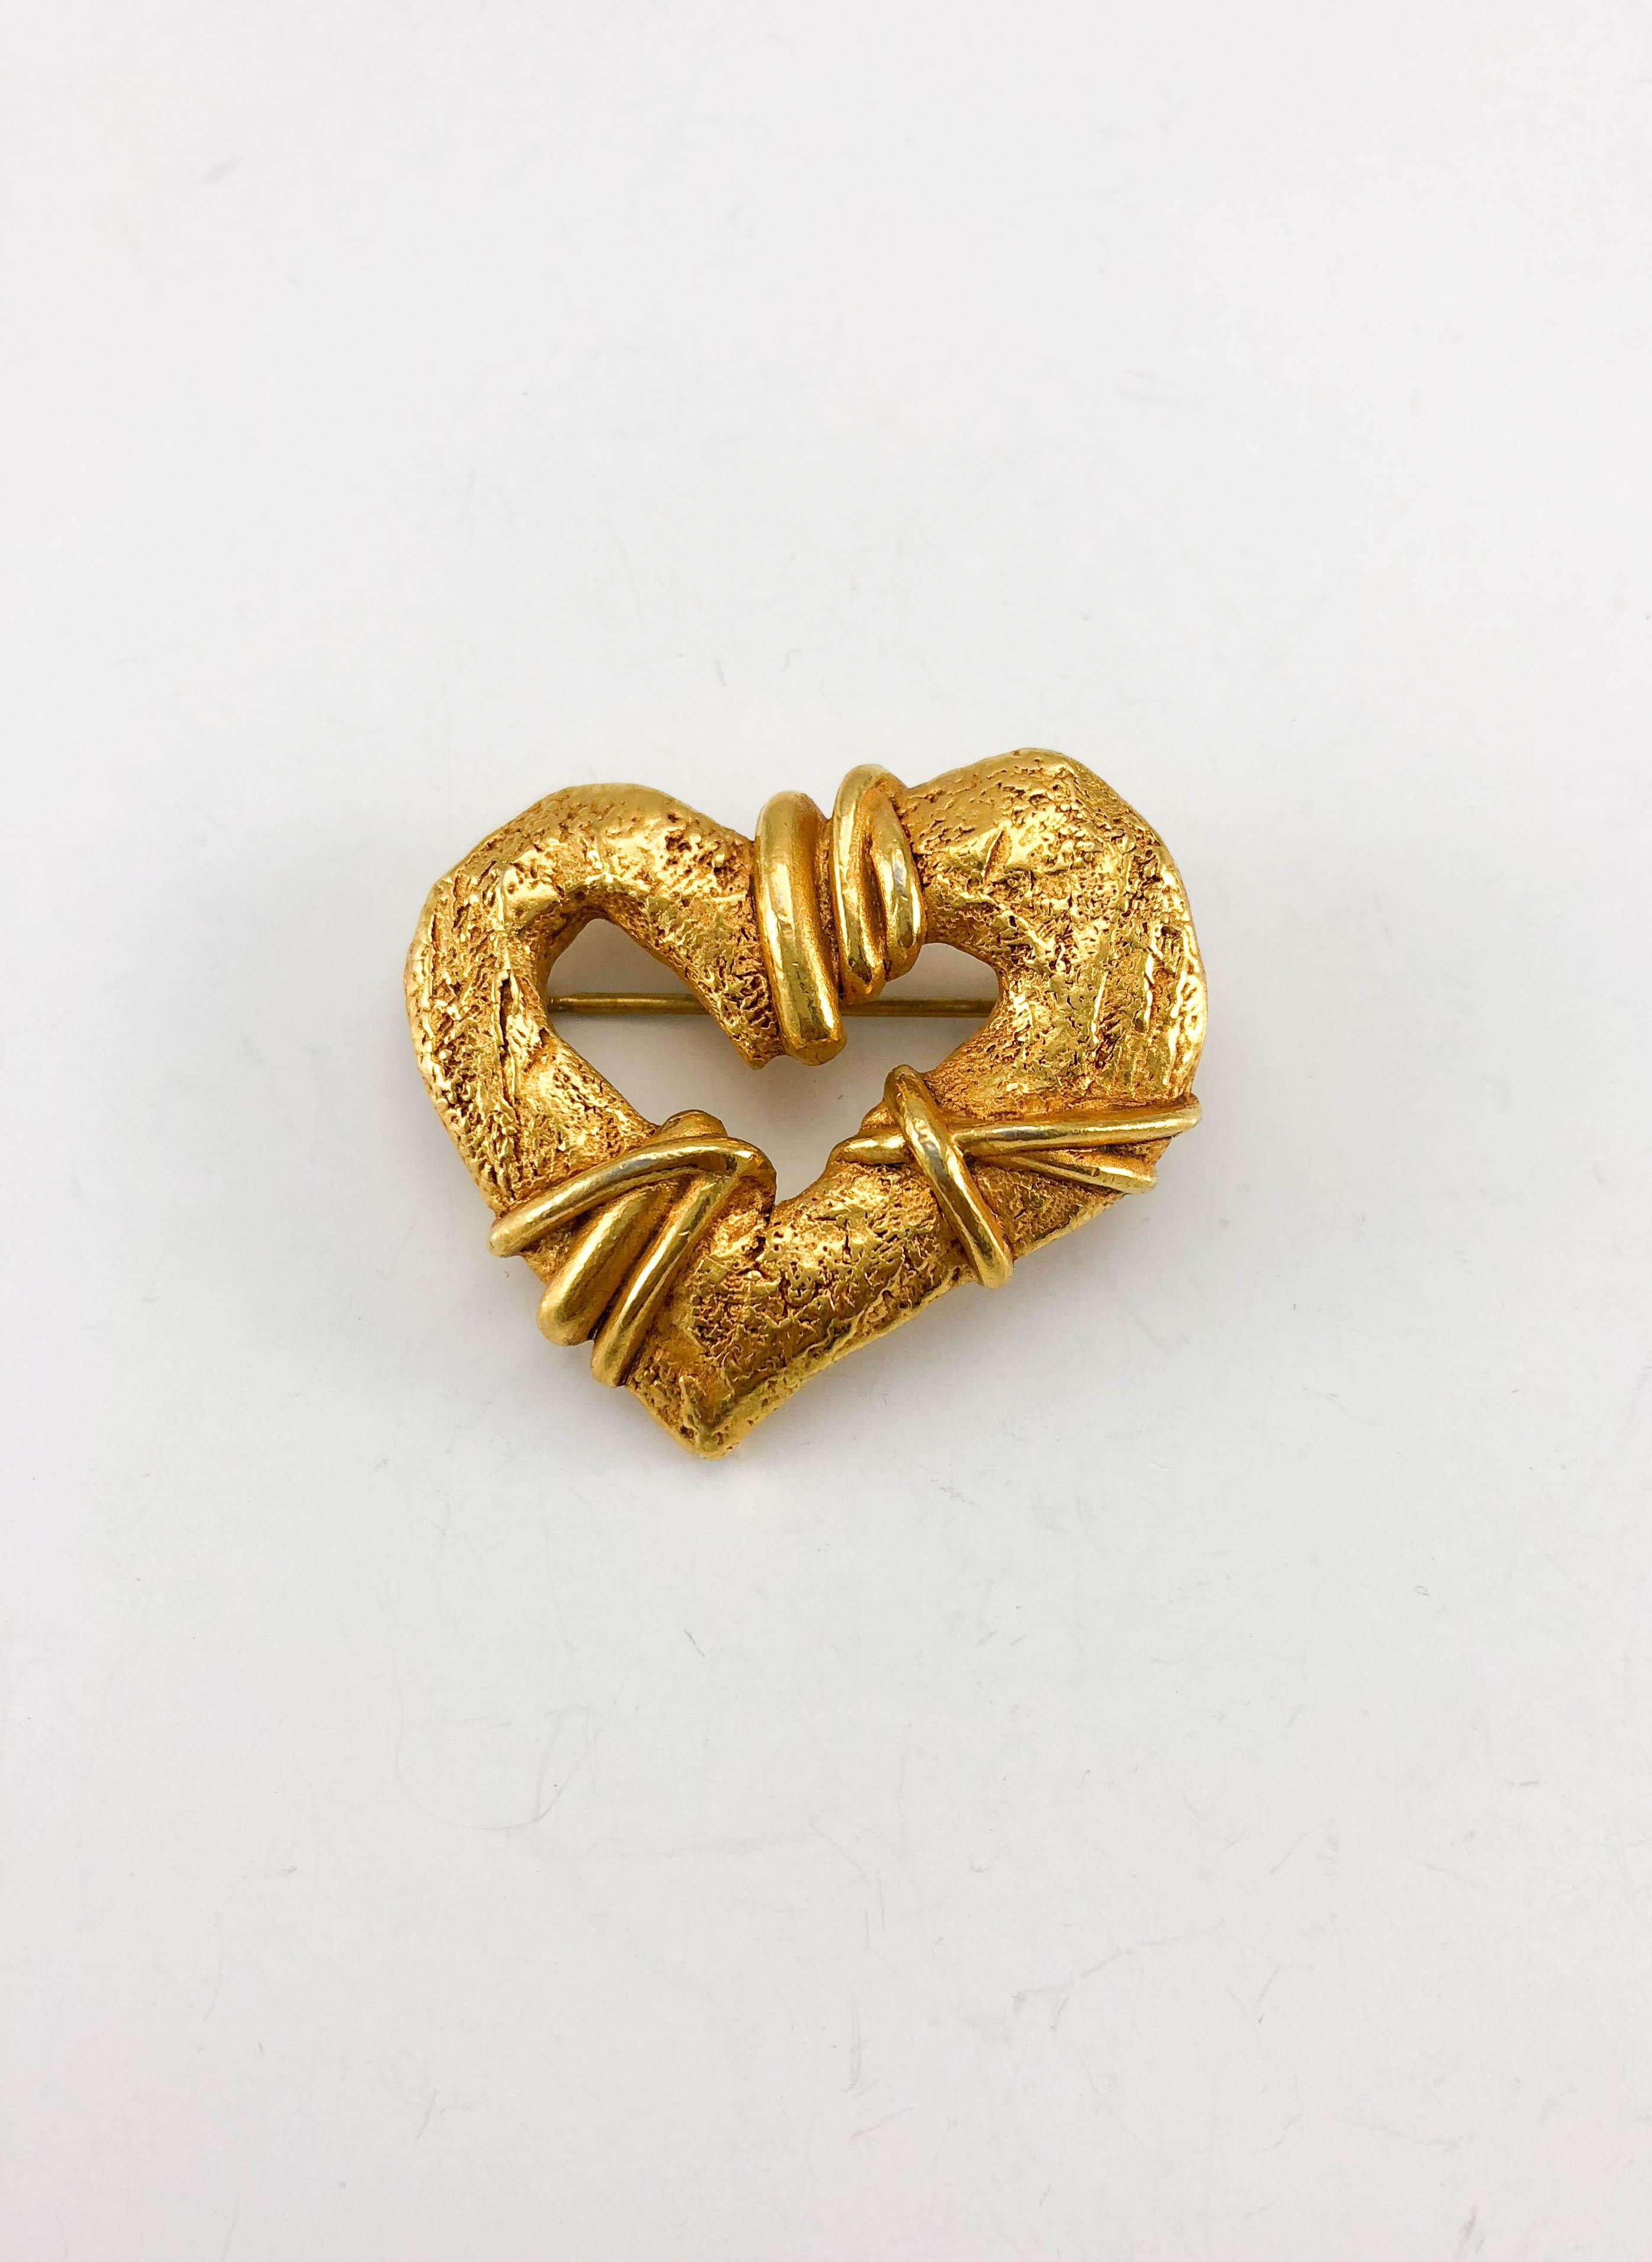 Women's 1994 Christian Lacroix Gold-Plated Heart Brooch, by Robert Goossens For Sale